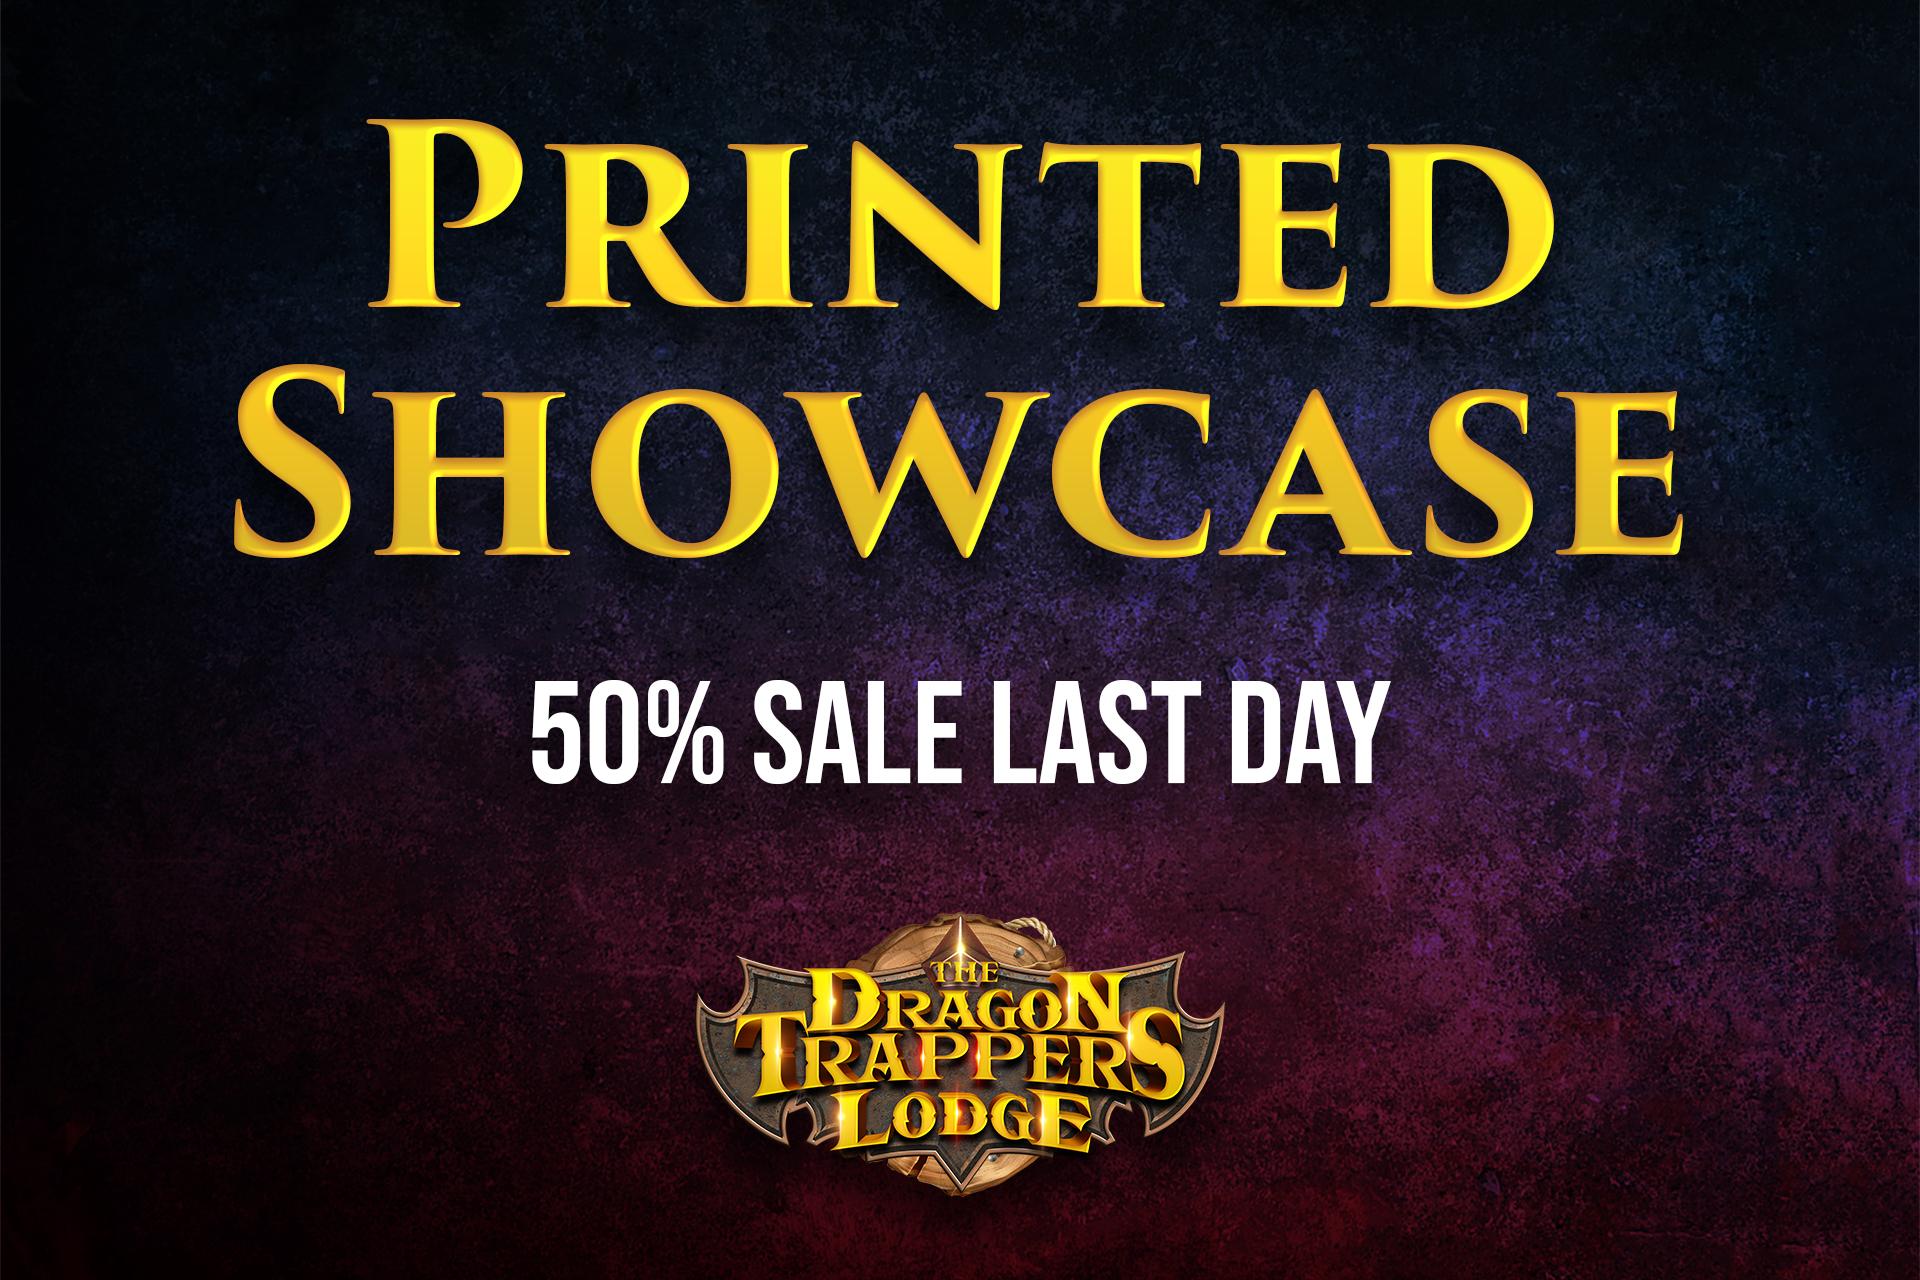 Printed Showcase and 50% Sale last day